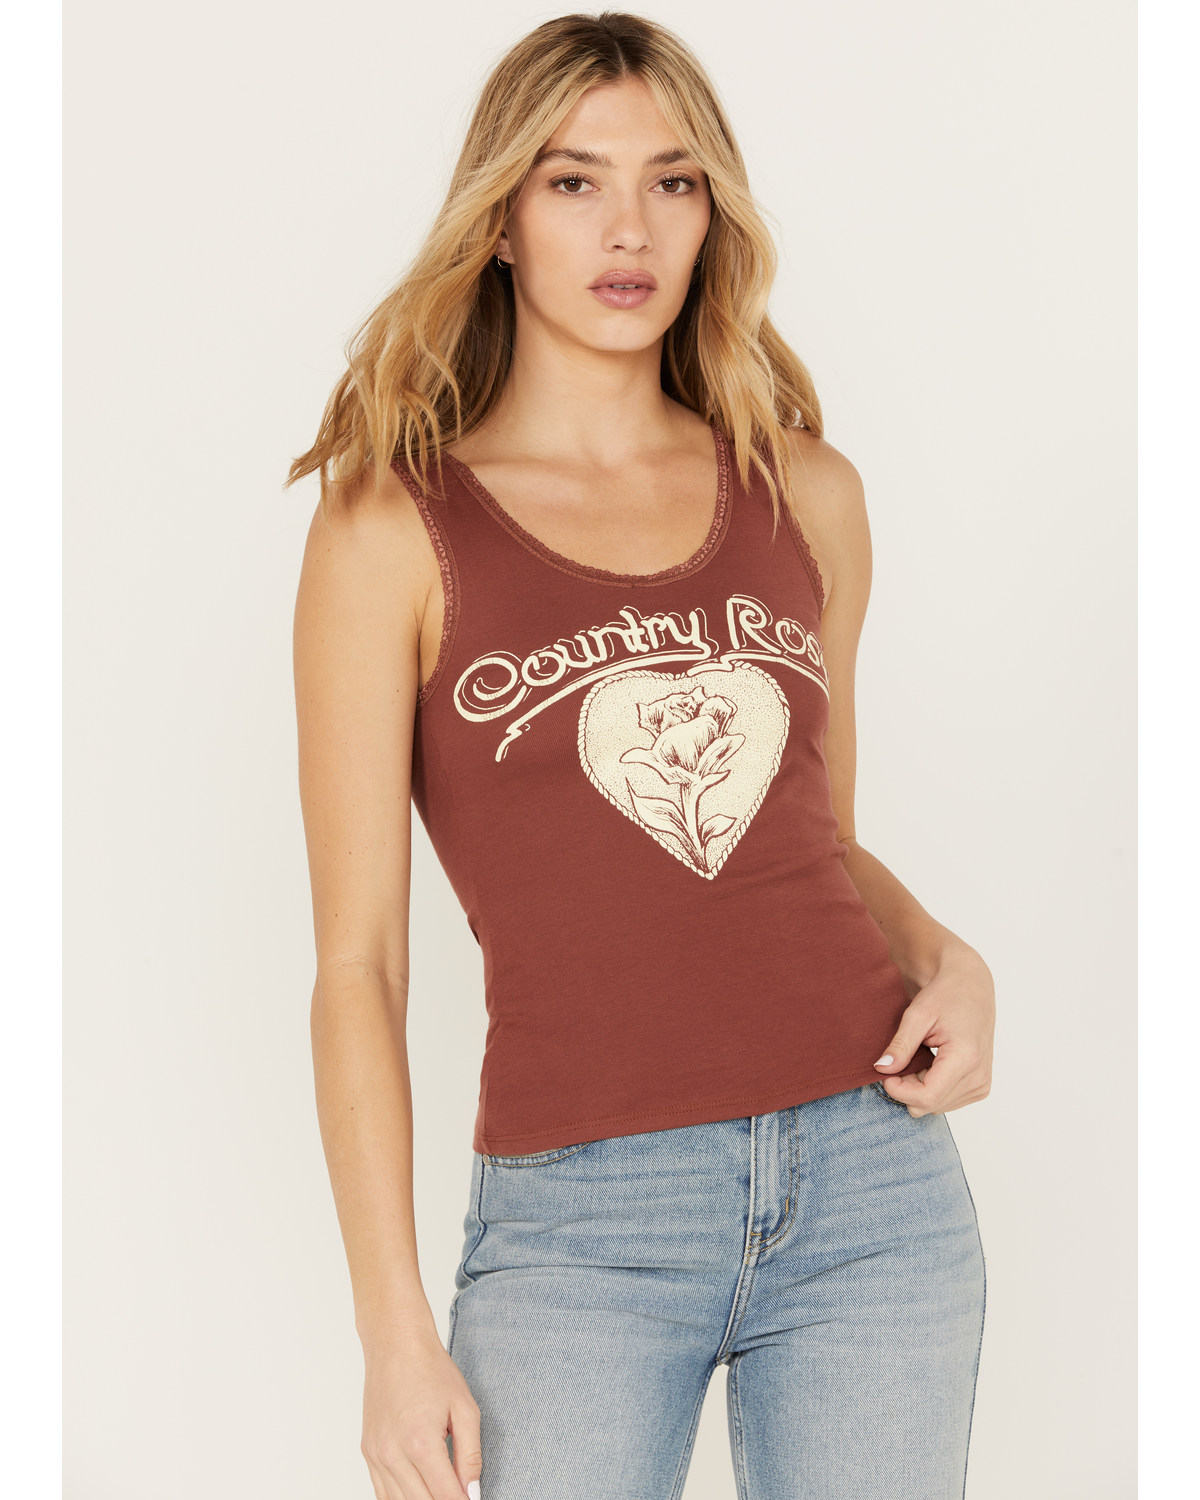 Bandit Women's Country Rose Lace Trim Graphic Tank